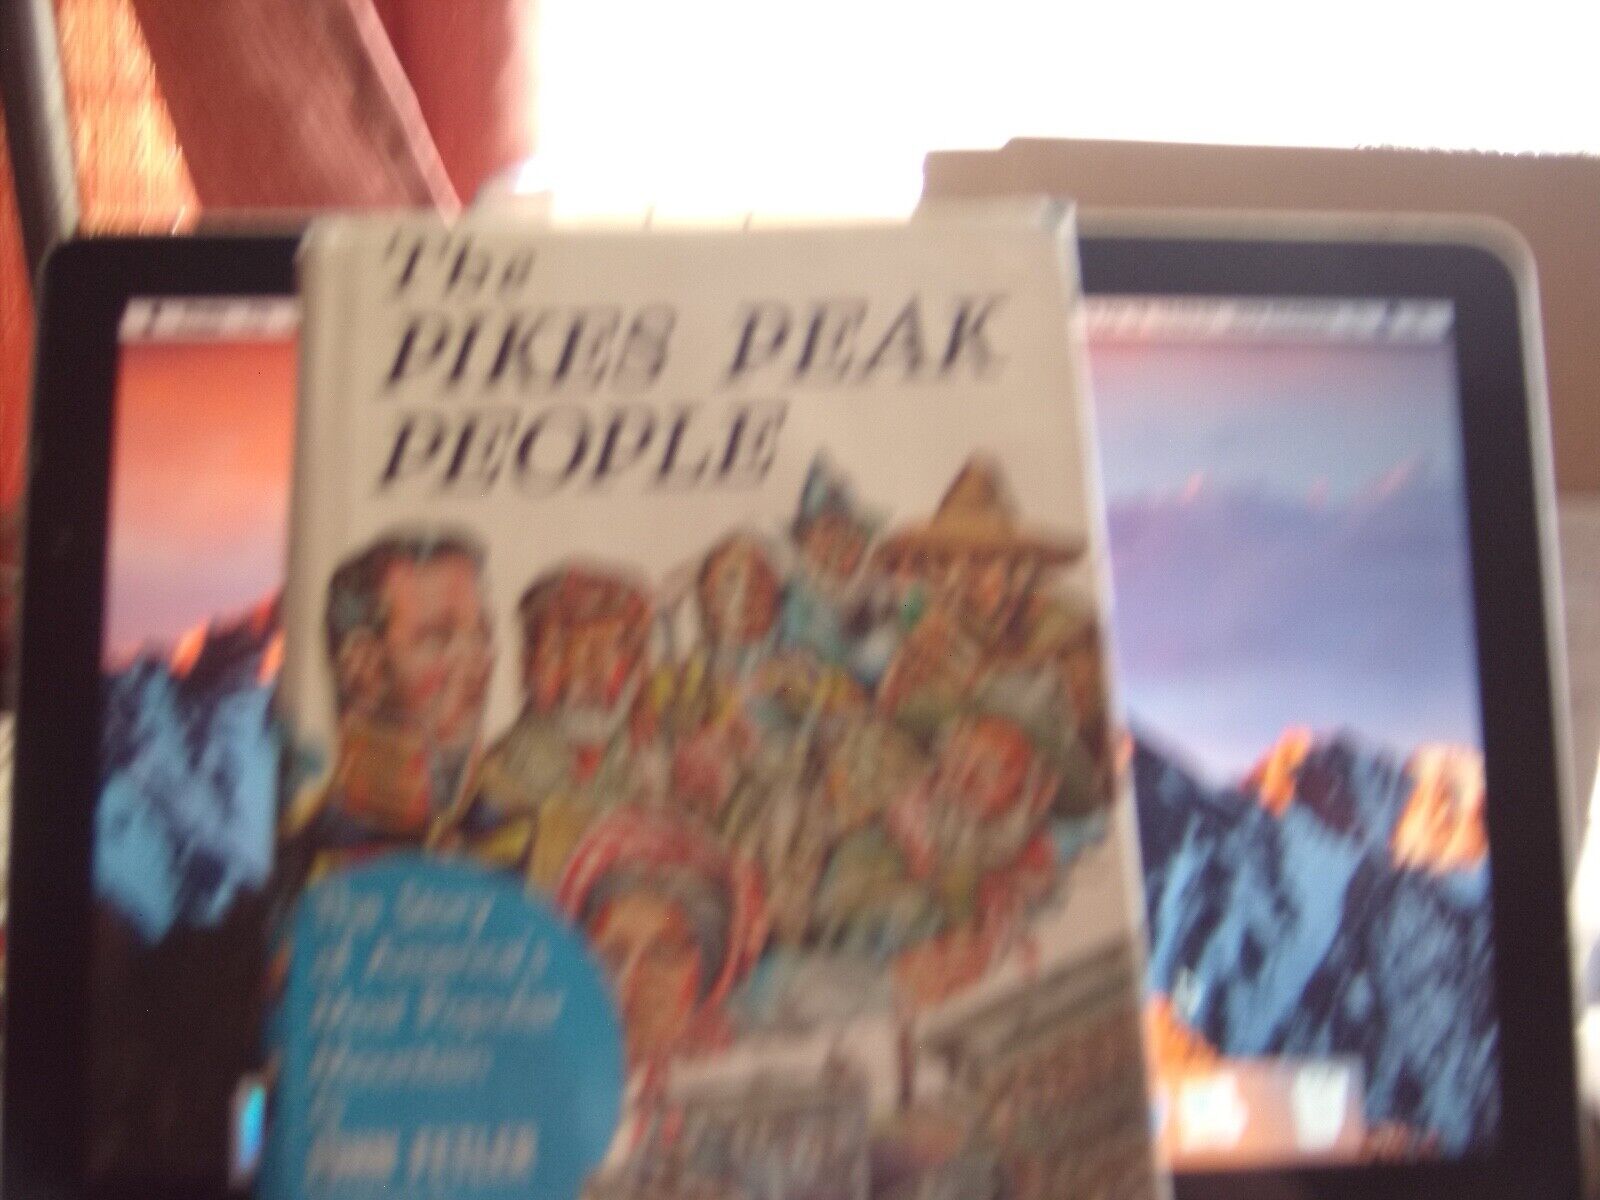 BKS-LOCAL CO. HISTORY- THE PIKES PEAK PEOPLE, JOPHN FELTER HC ,1966,CAXTON.